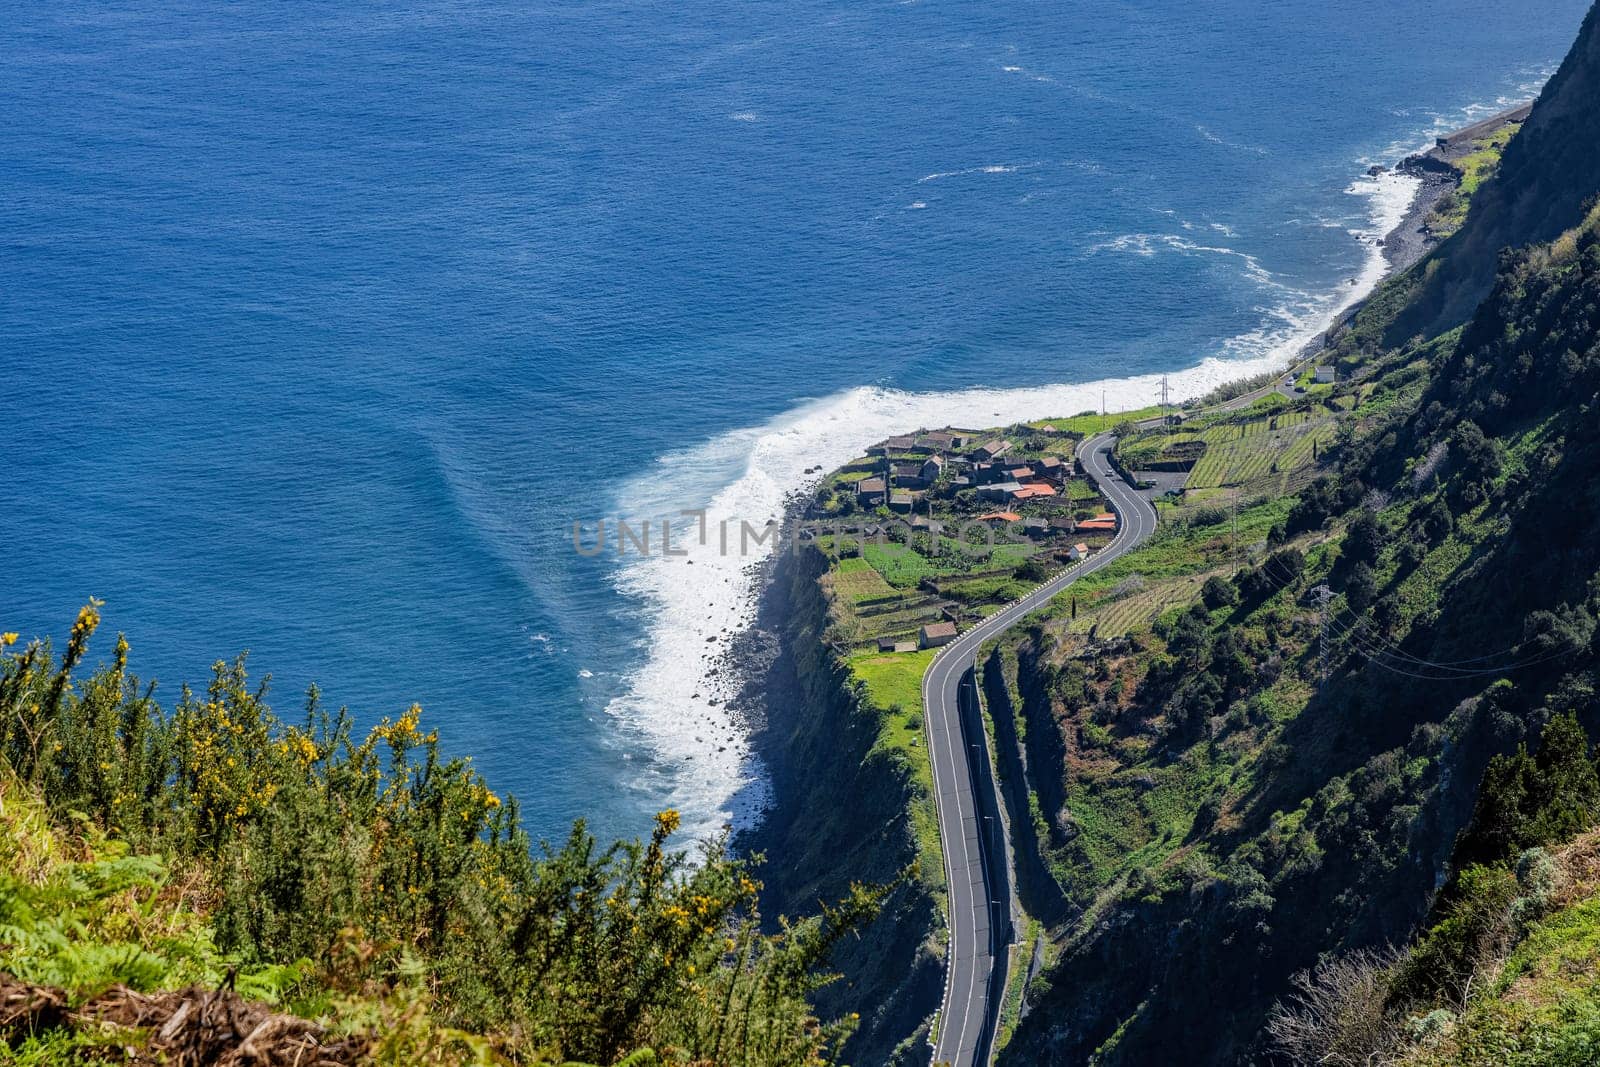 A scenic view of a winding road along a steep cliffside overlooking the ocean